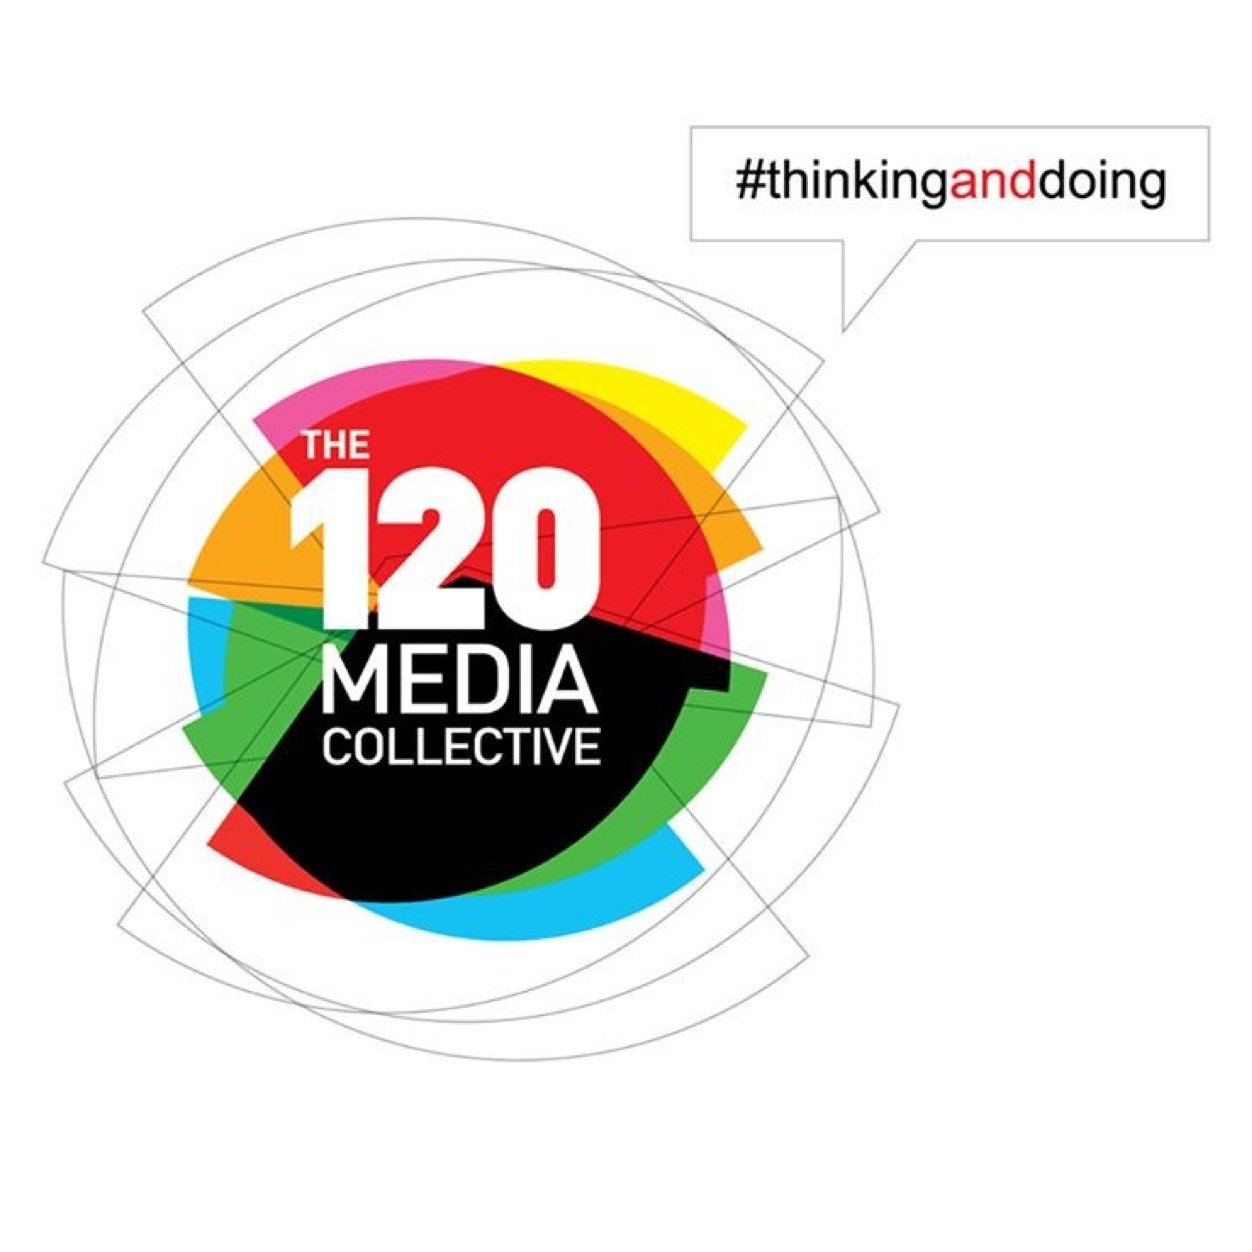 The120MediaCollective, a #thinkinganddoing co. that creates/produces/distributes content for audiences & brands across multiple platforms & geographies